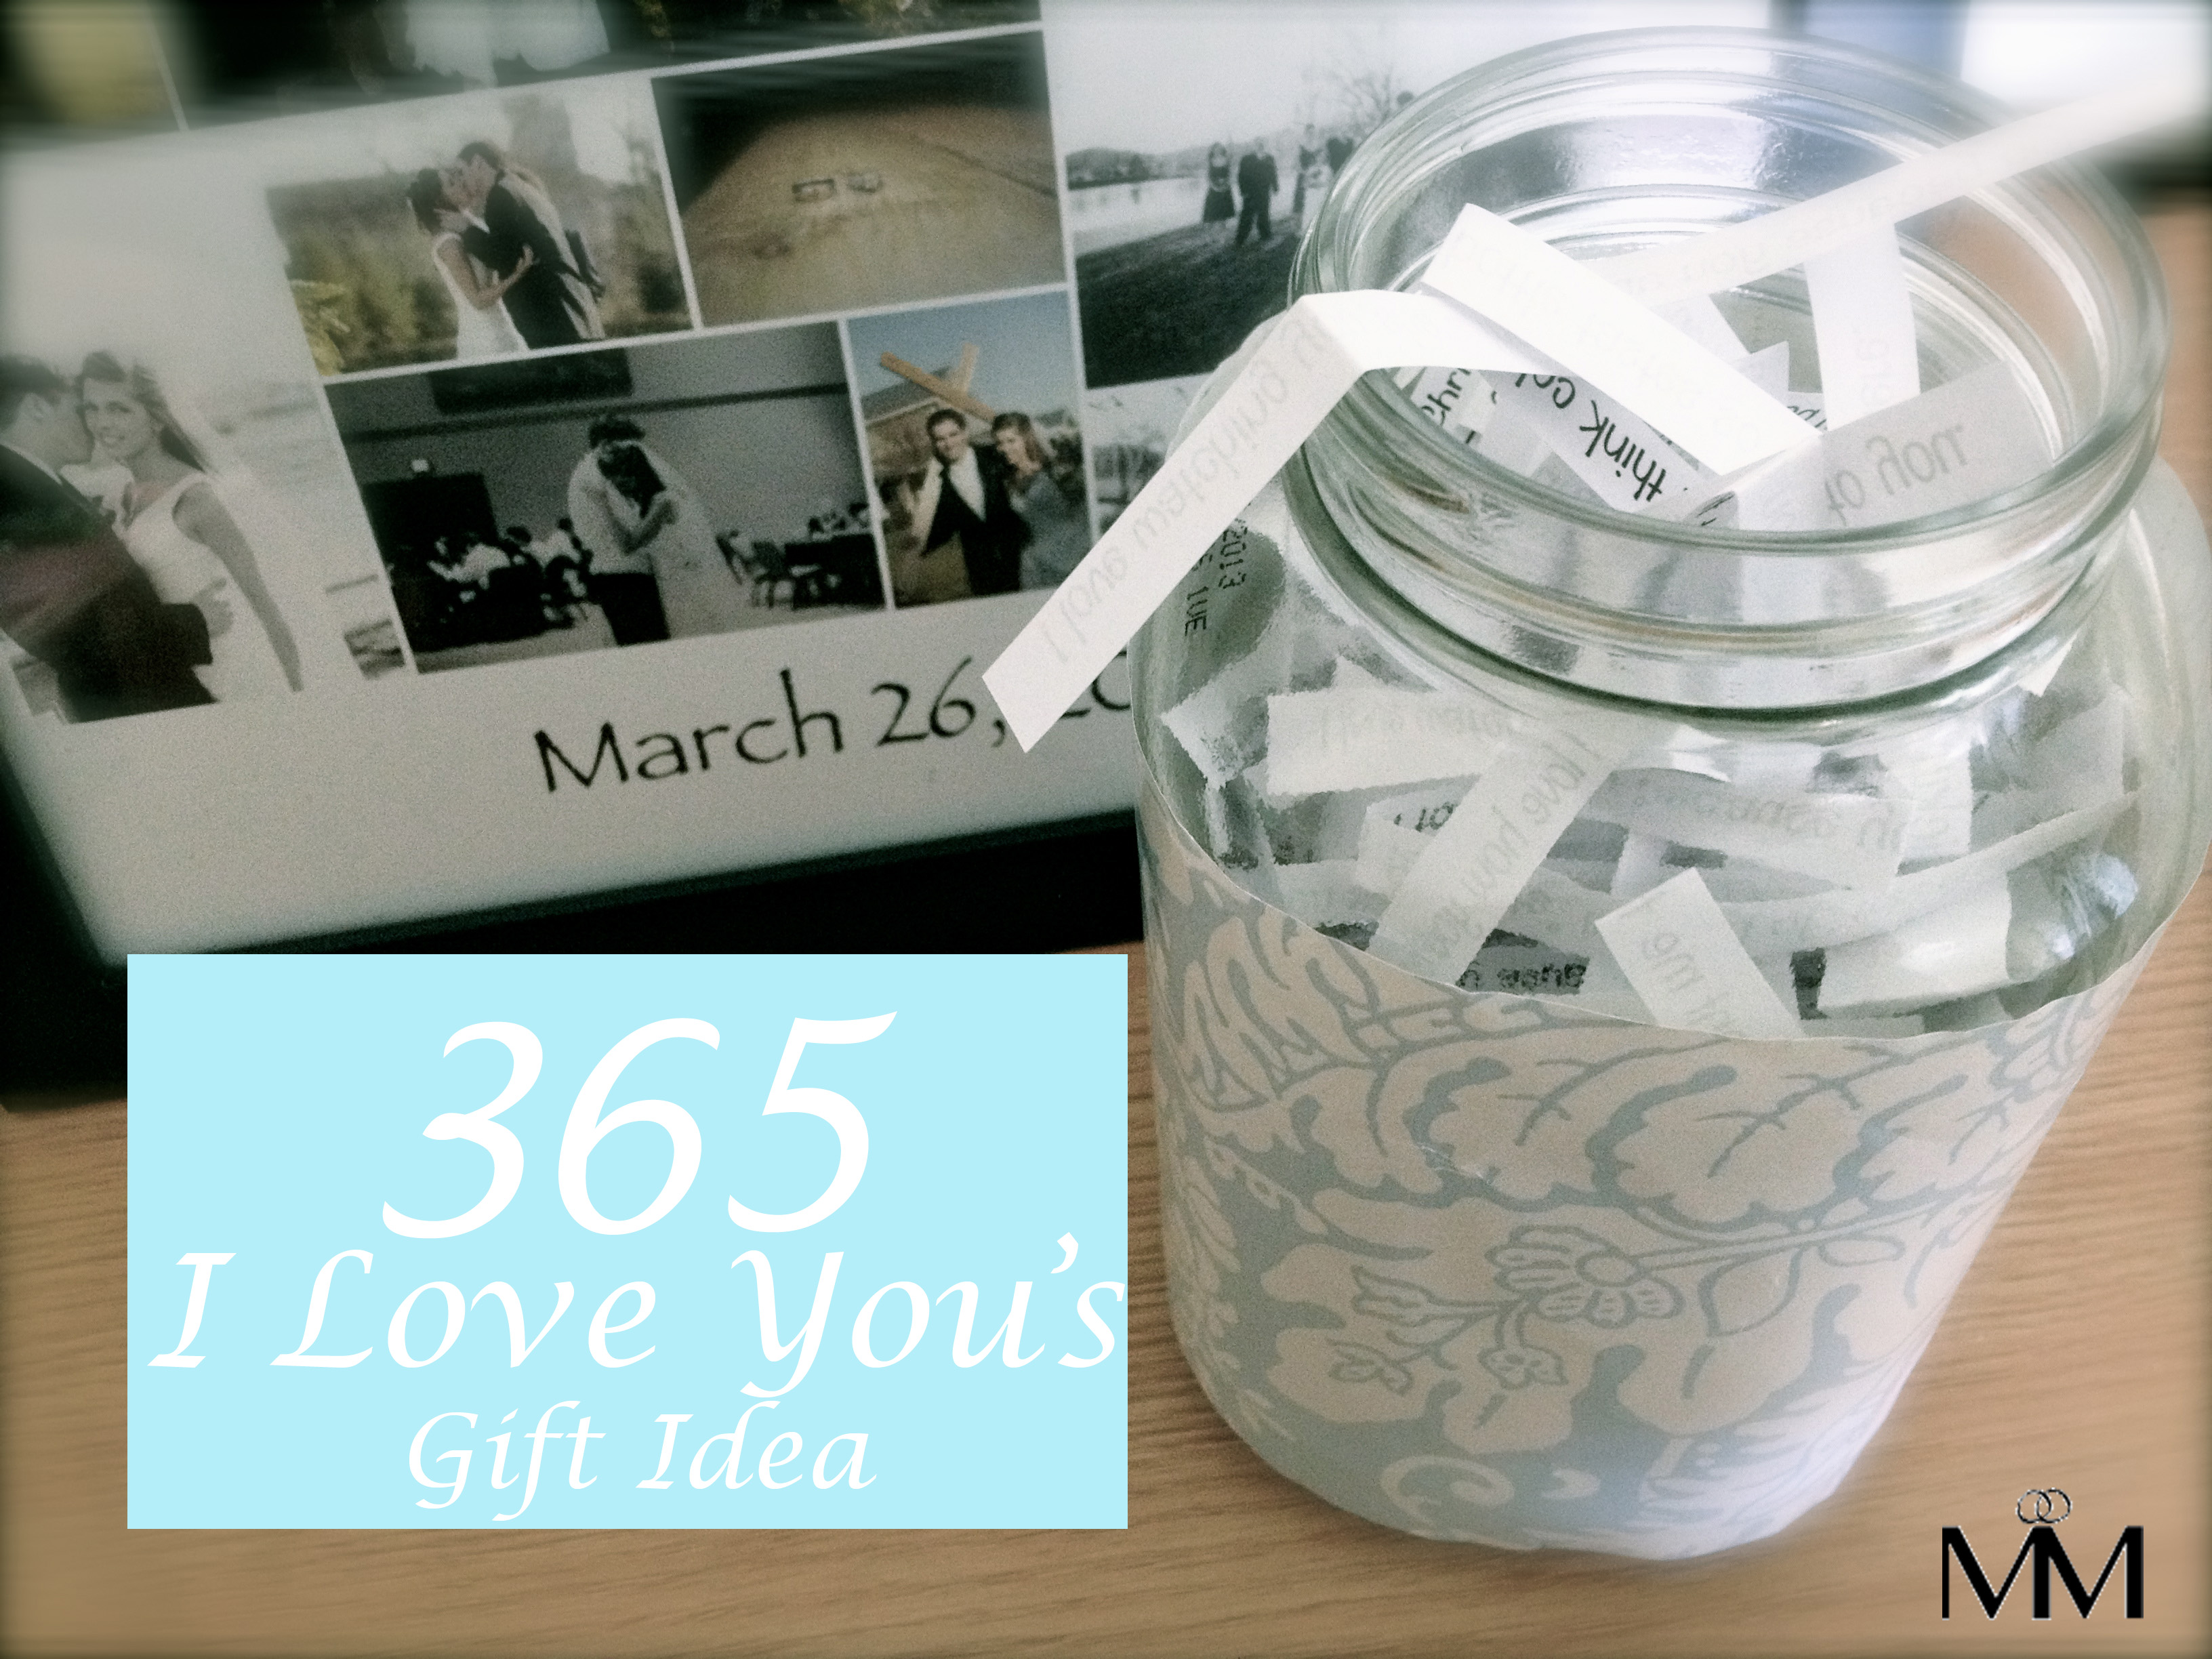 diy 2 year anniversary gift idea - the 365 reasons why i love you